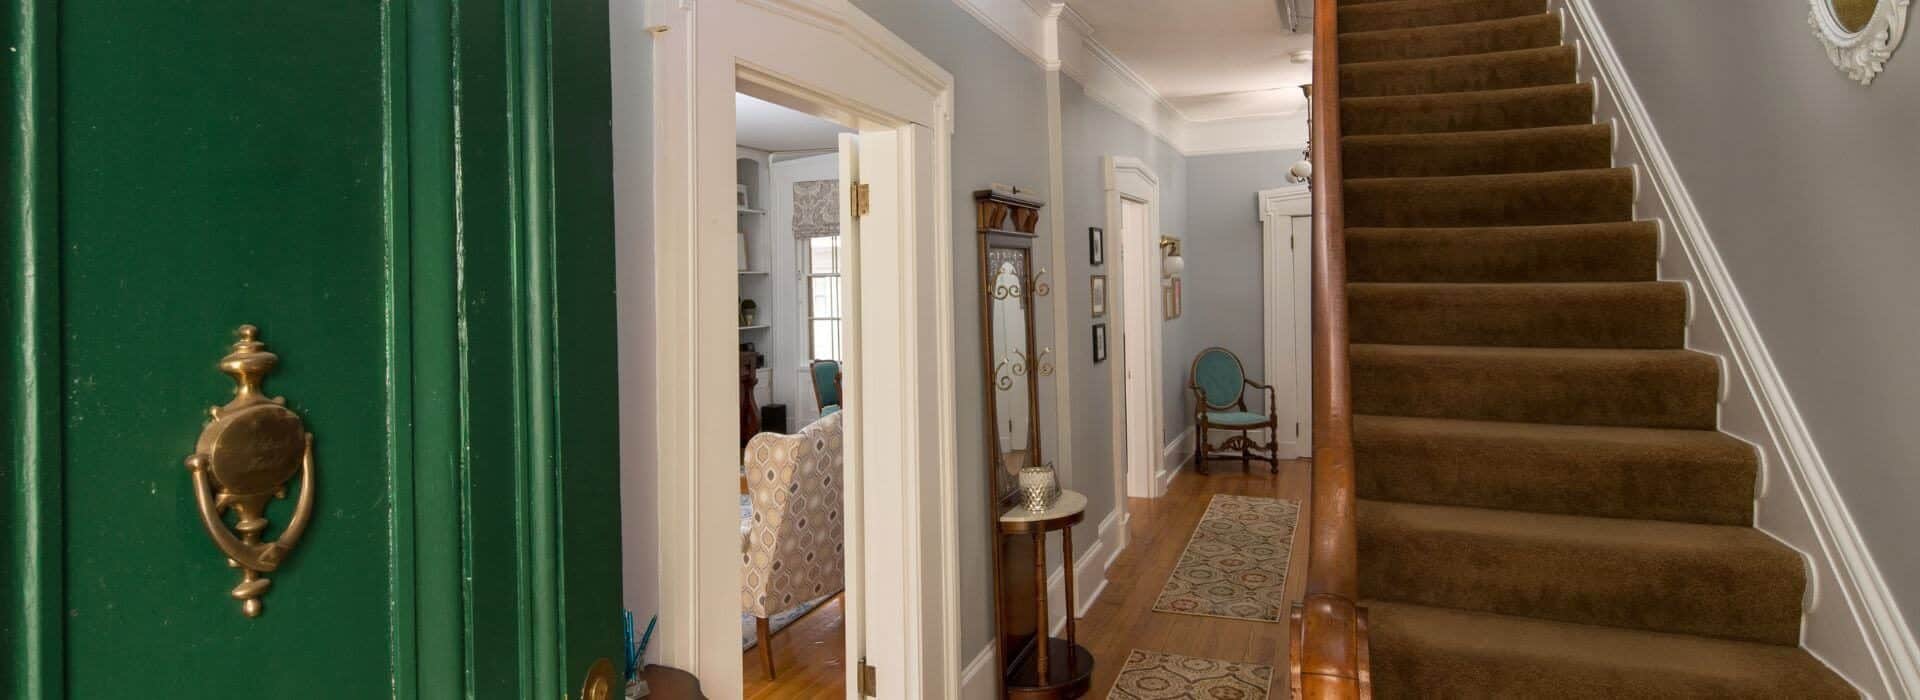 Foyer with open green door with brass knocker, stairway with carpeting, gray walls with white trim, wood floor with tapestry rugs, and anitique furniture